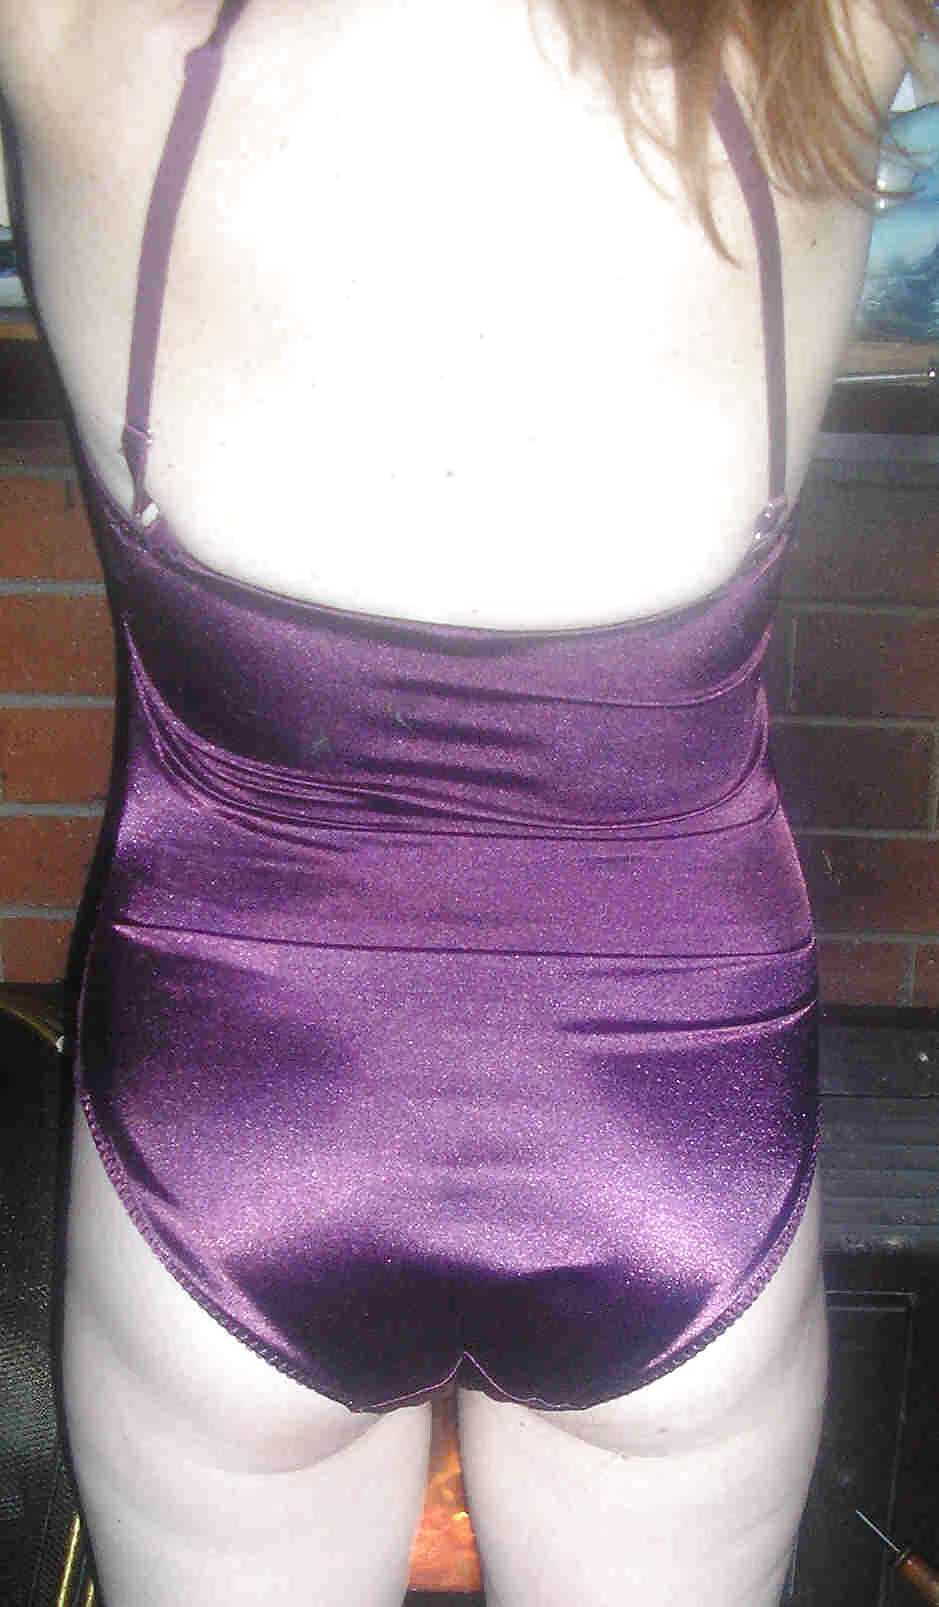 My satin lingerie and panties #8477285